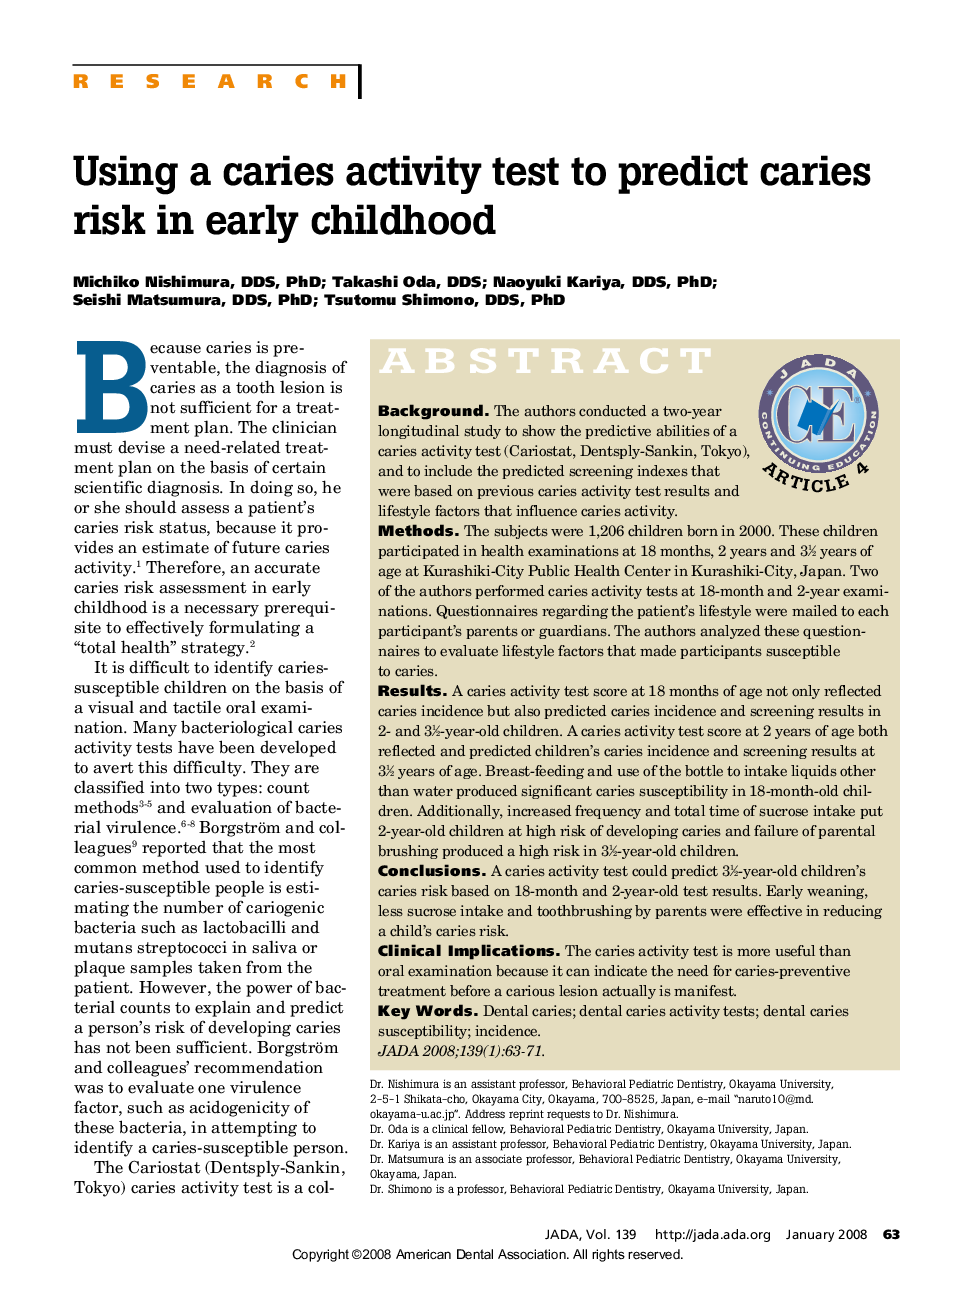 Using a Caries Activity Test to Predict Caries Risk in Early Childhood